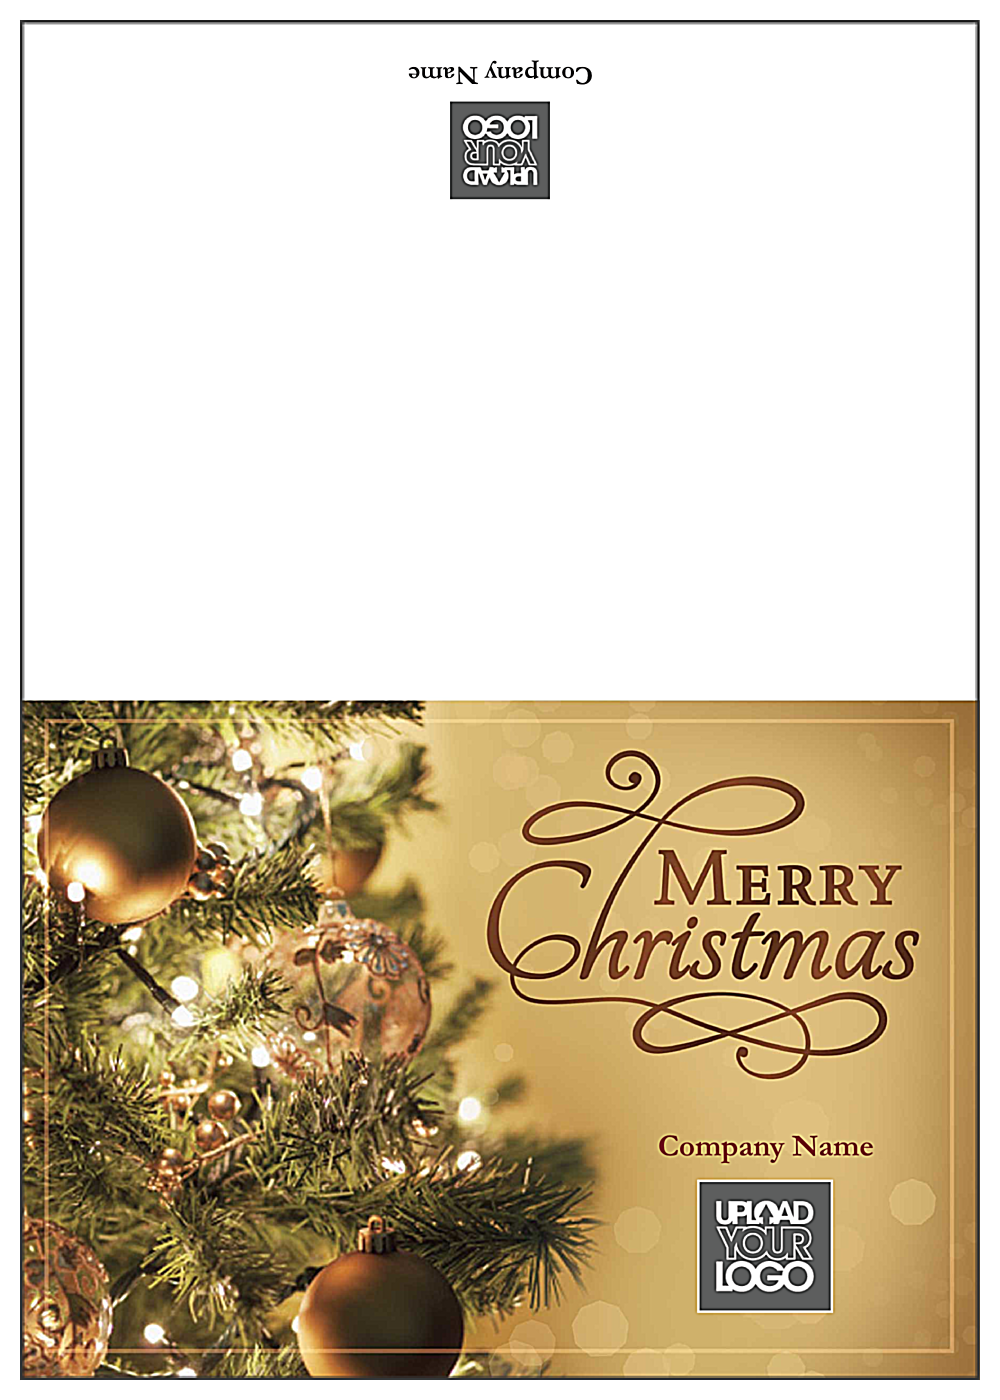 Golden Merry Christmas front - Greeting Cards Maker